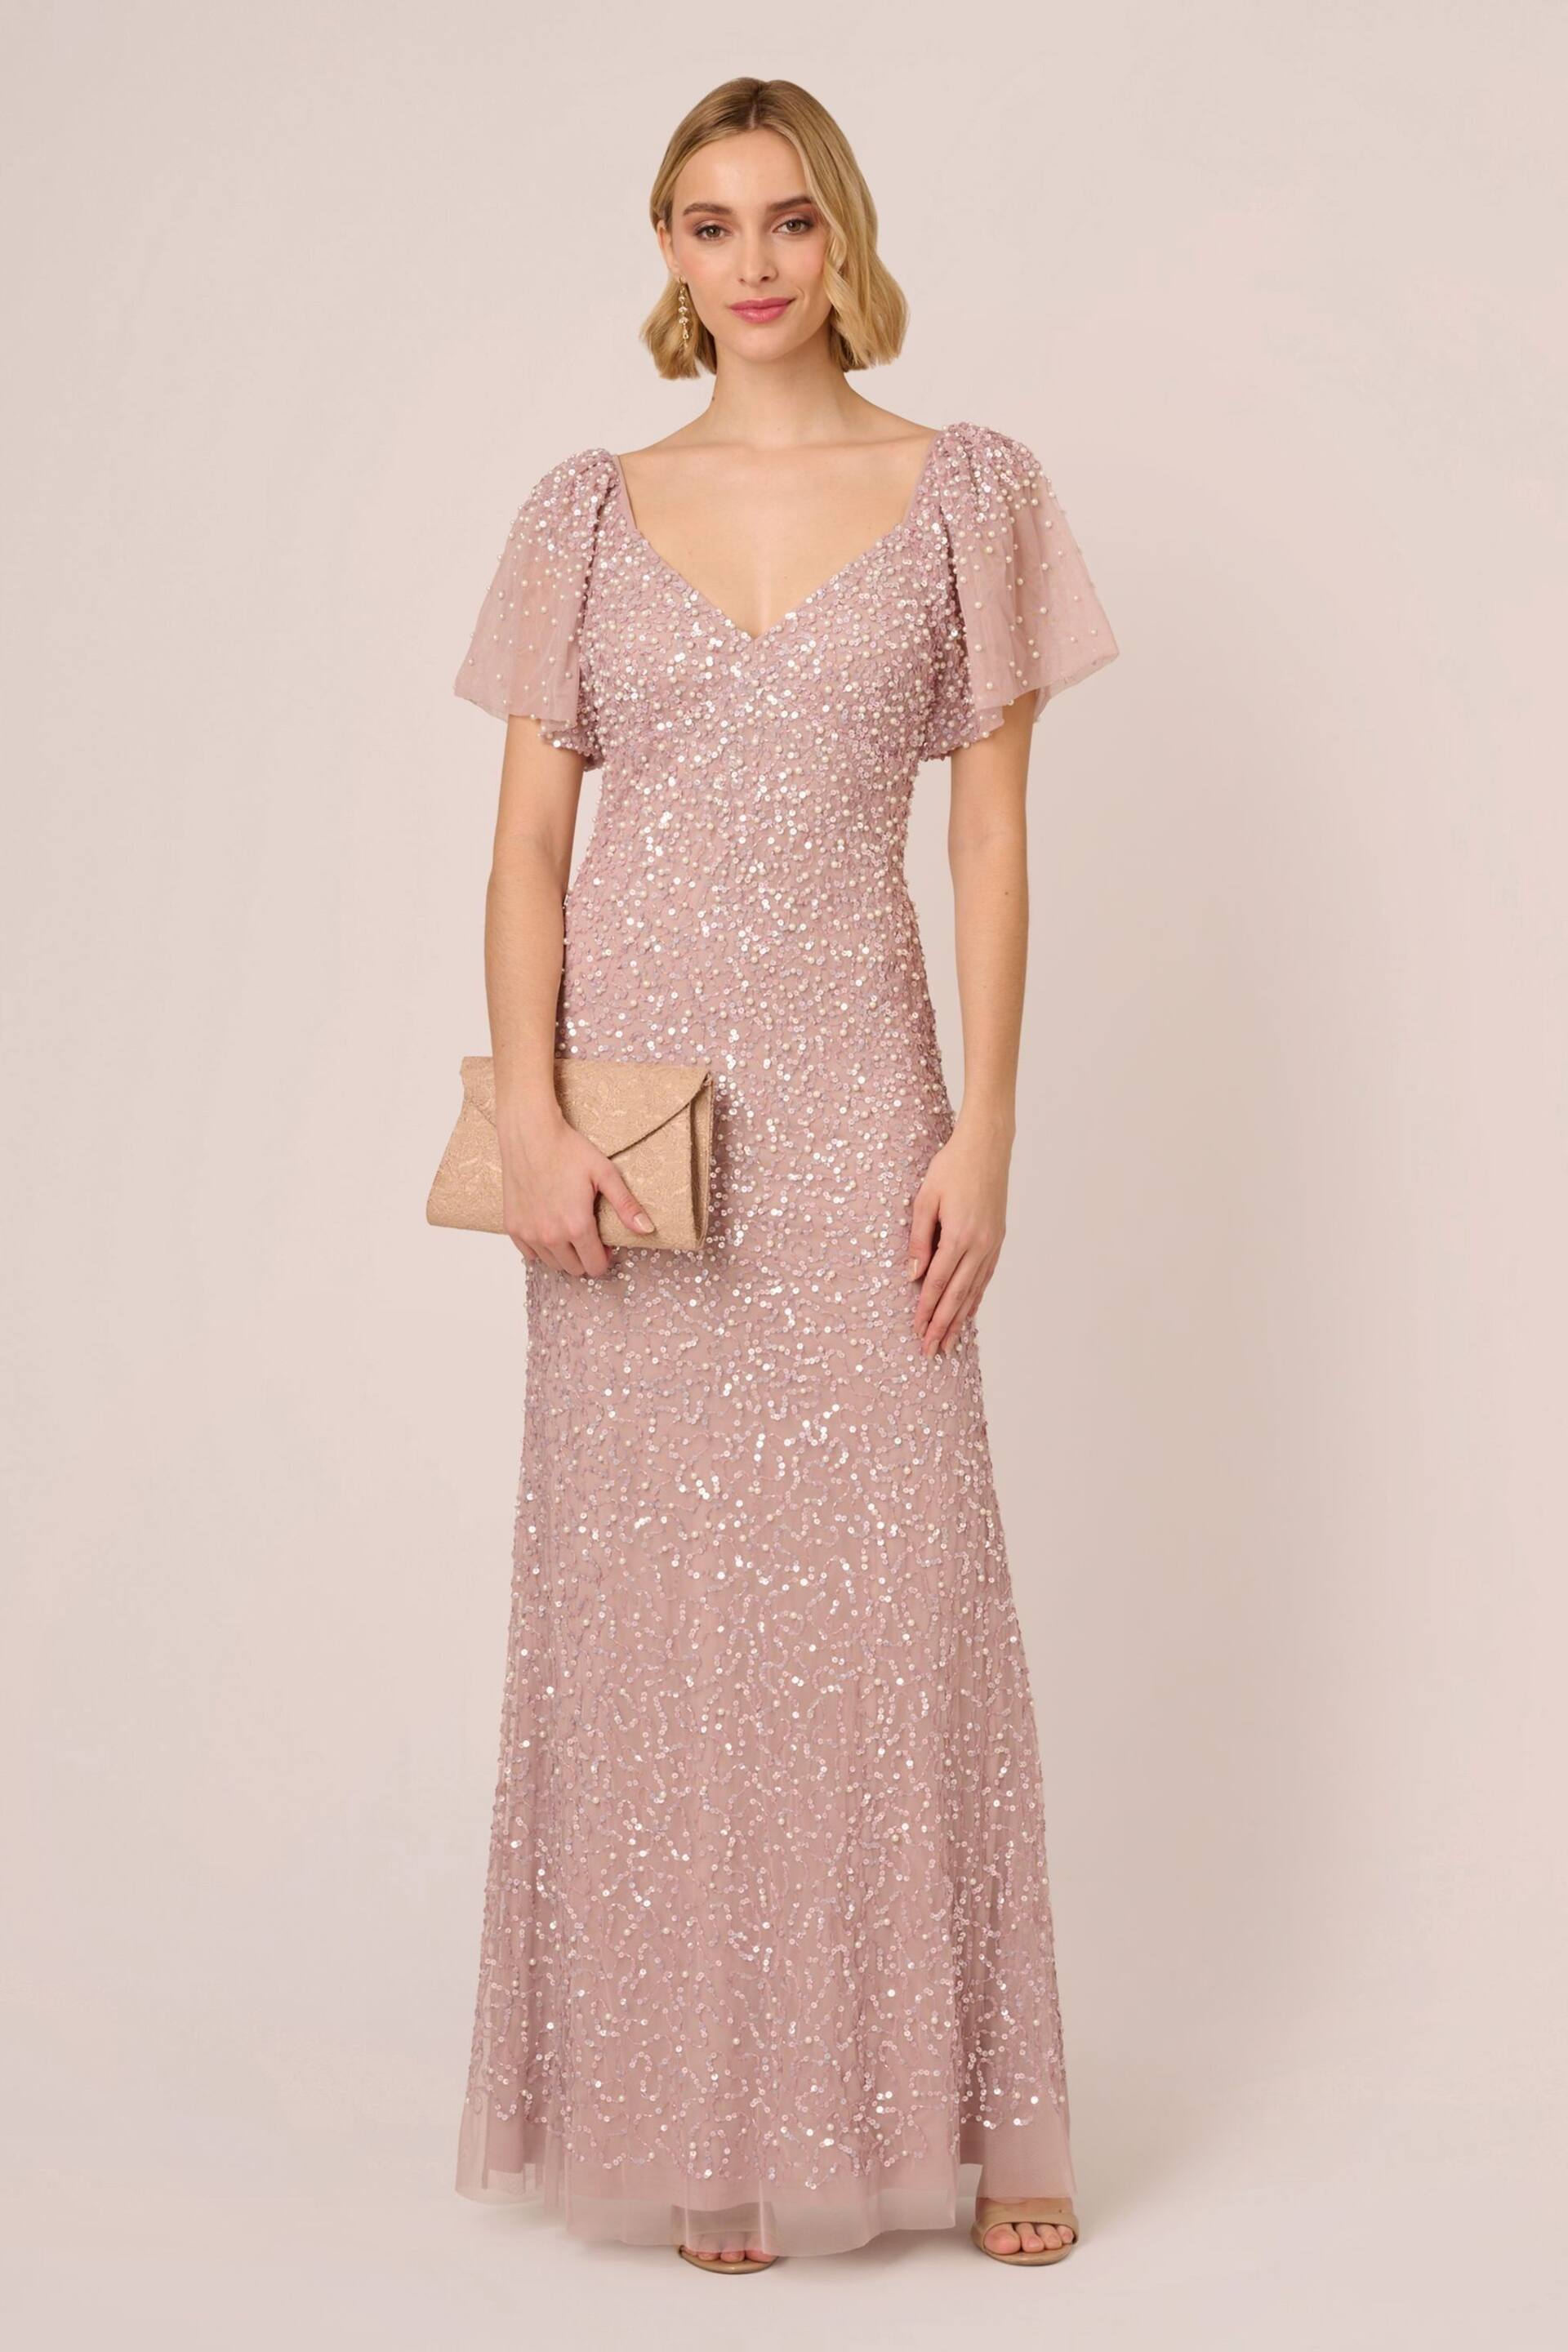 Adrianna Papell Pink V-Neck Beaded Mesh Long Dress - Image 3 of 7